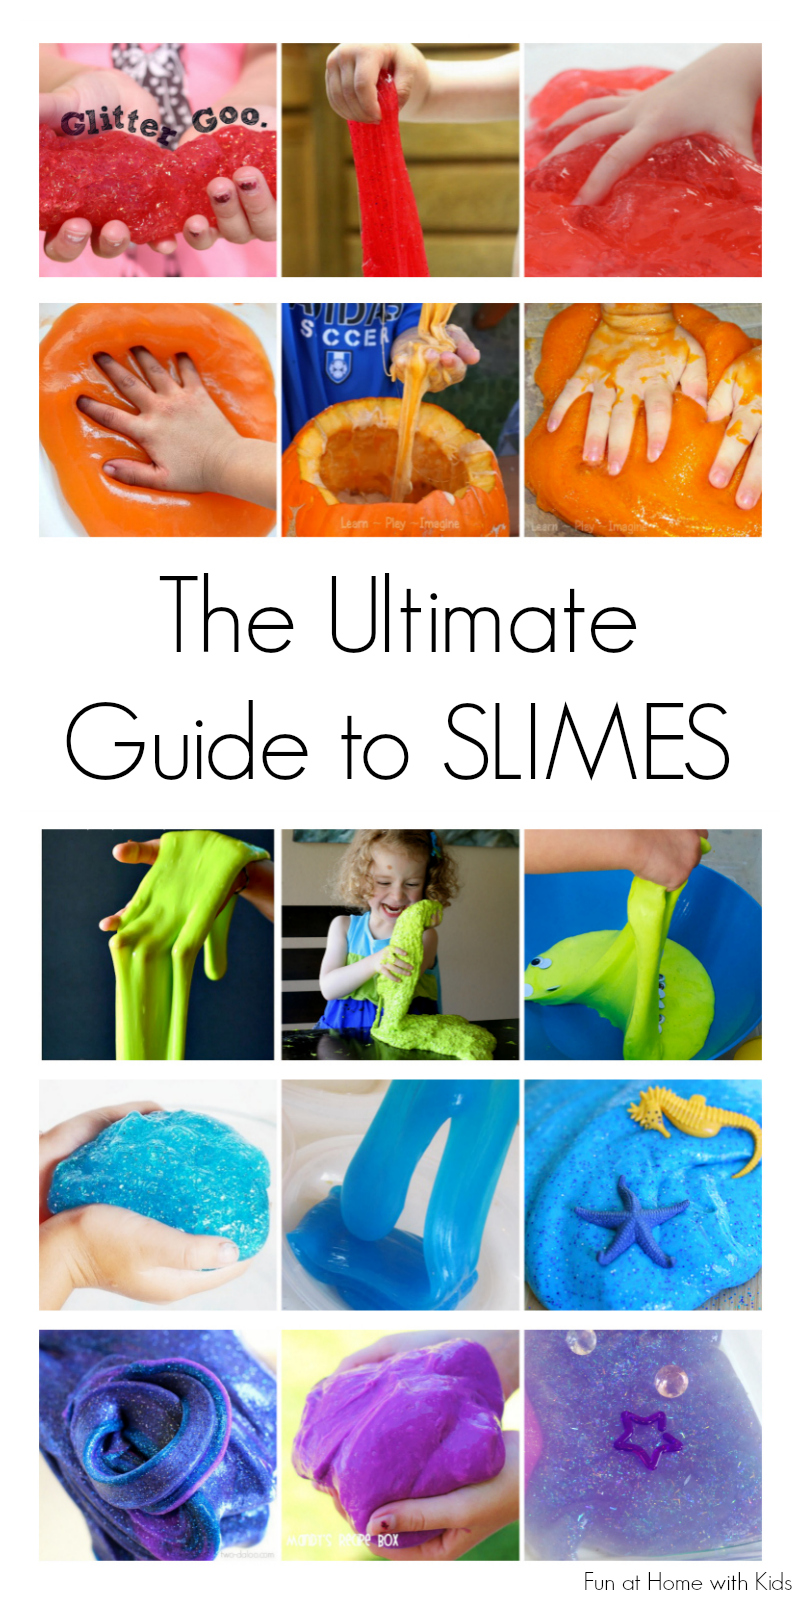 The ULTIMATE guide to slimes.  Recipes for slimes, flubber, flarp, and even edible (taste-safe) slimes!  Fun for all ages.  In addition to recipes, there are several fun ideas for how to play with slimes.  From Fun at Home with Kids